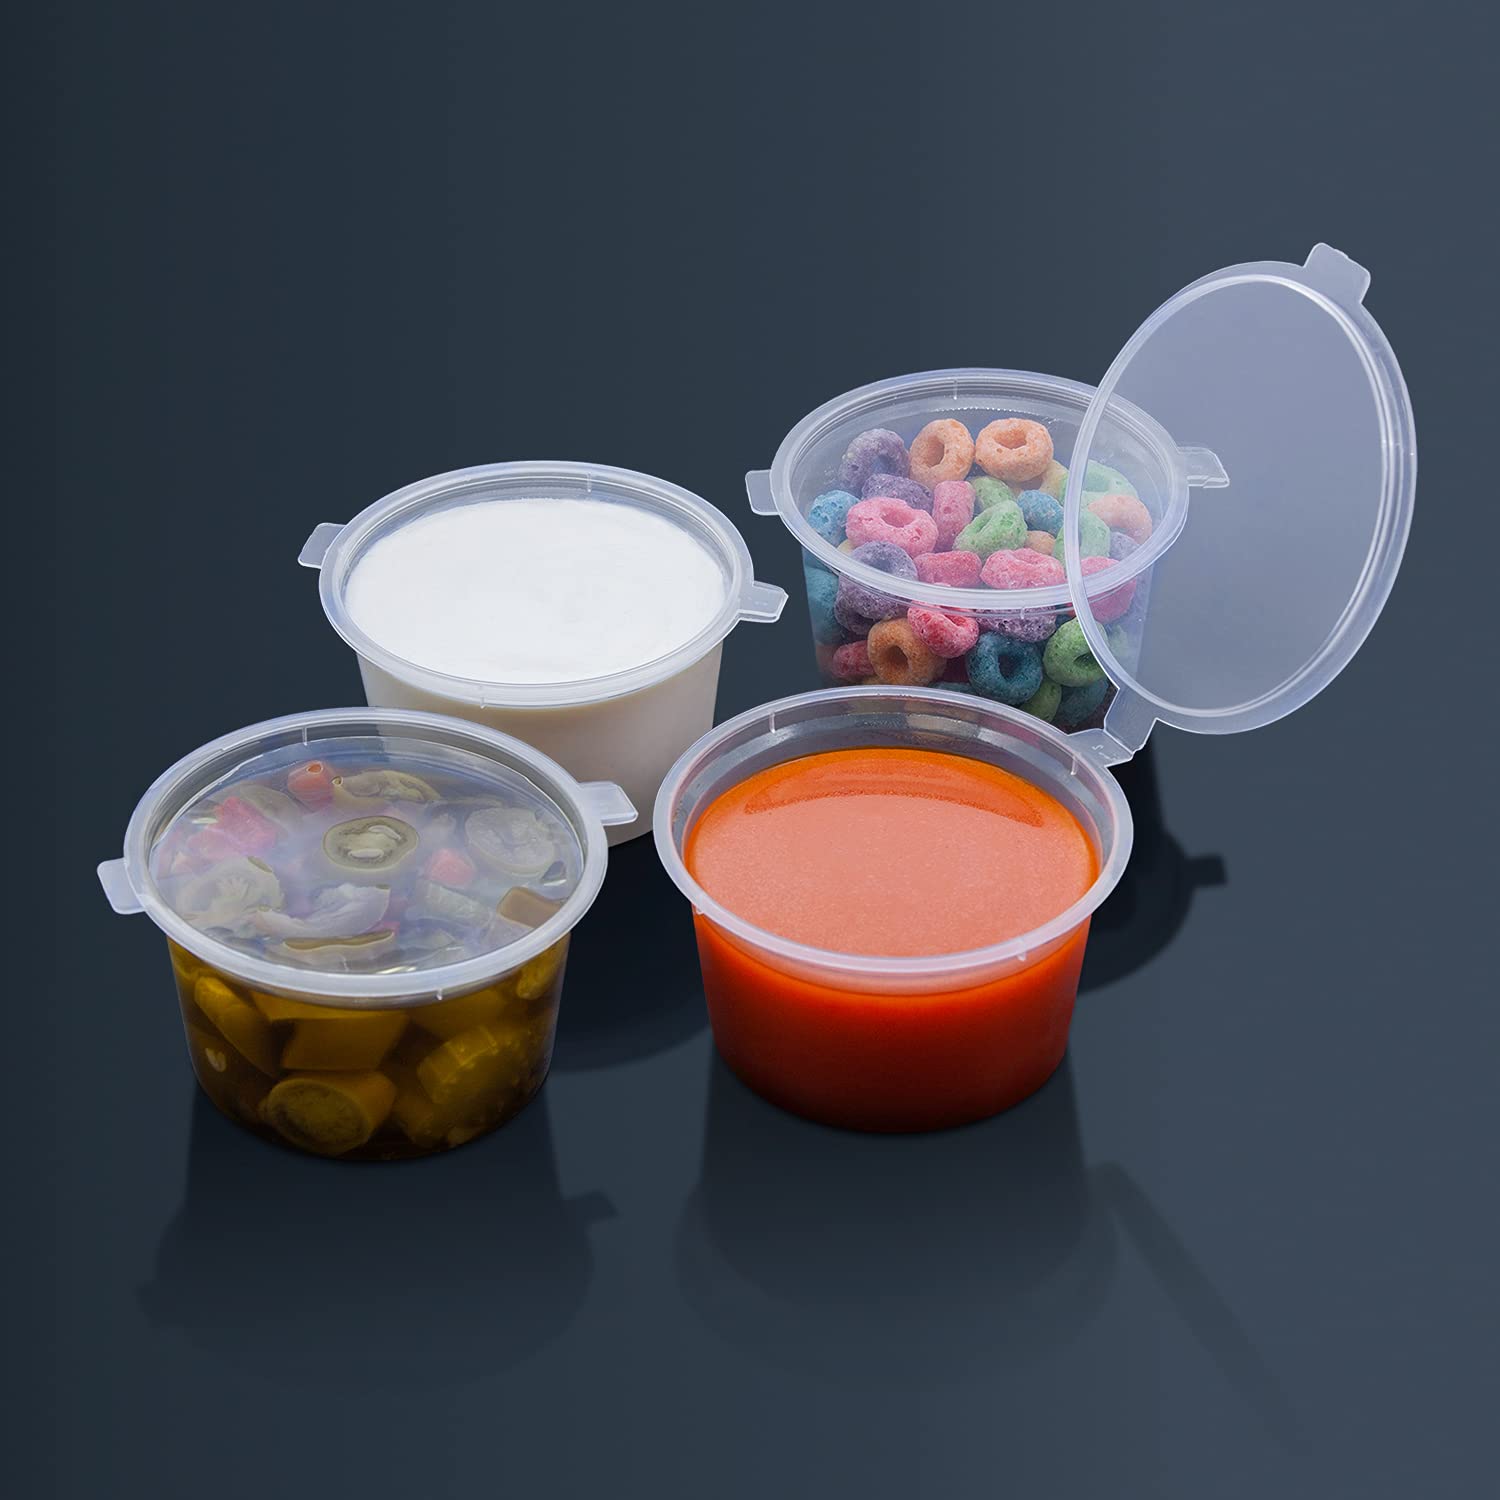 Party Essentials Leak Proof Plastic Condiment Souffle Containers with Attached Airtight Portion Cup with Hinged Lid for Sauces, Samples, Slime, Jello Shot, Storage, Craft, 100 Sets, 2 oz, Clear